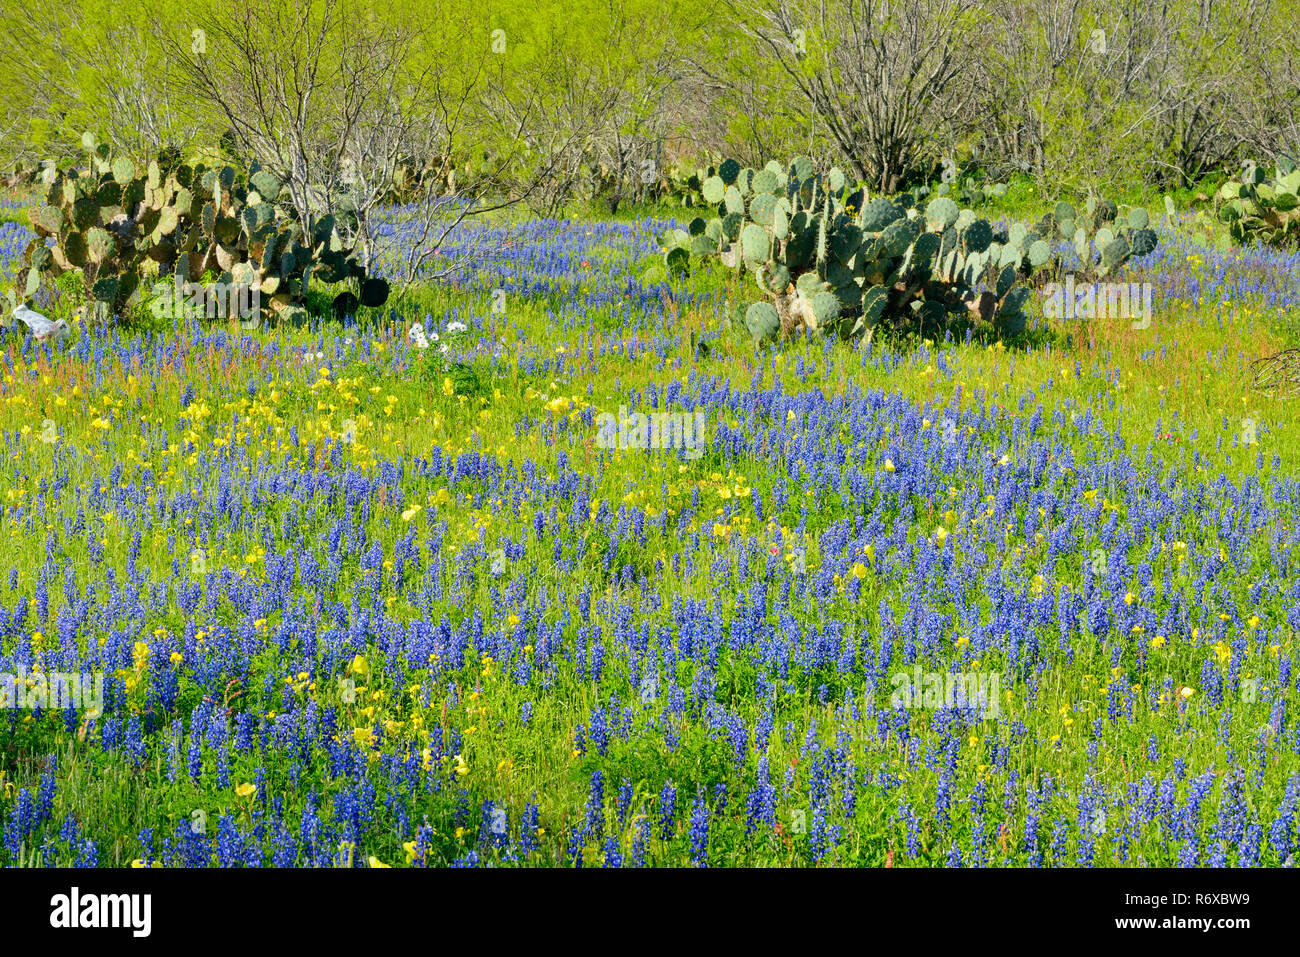 Prickly pear cactus and bluebonnets , FM 2504 near Somerset, Texas, USA Stock Photo